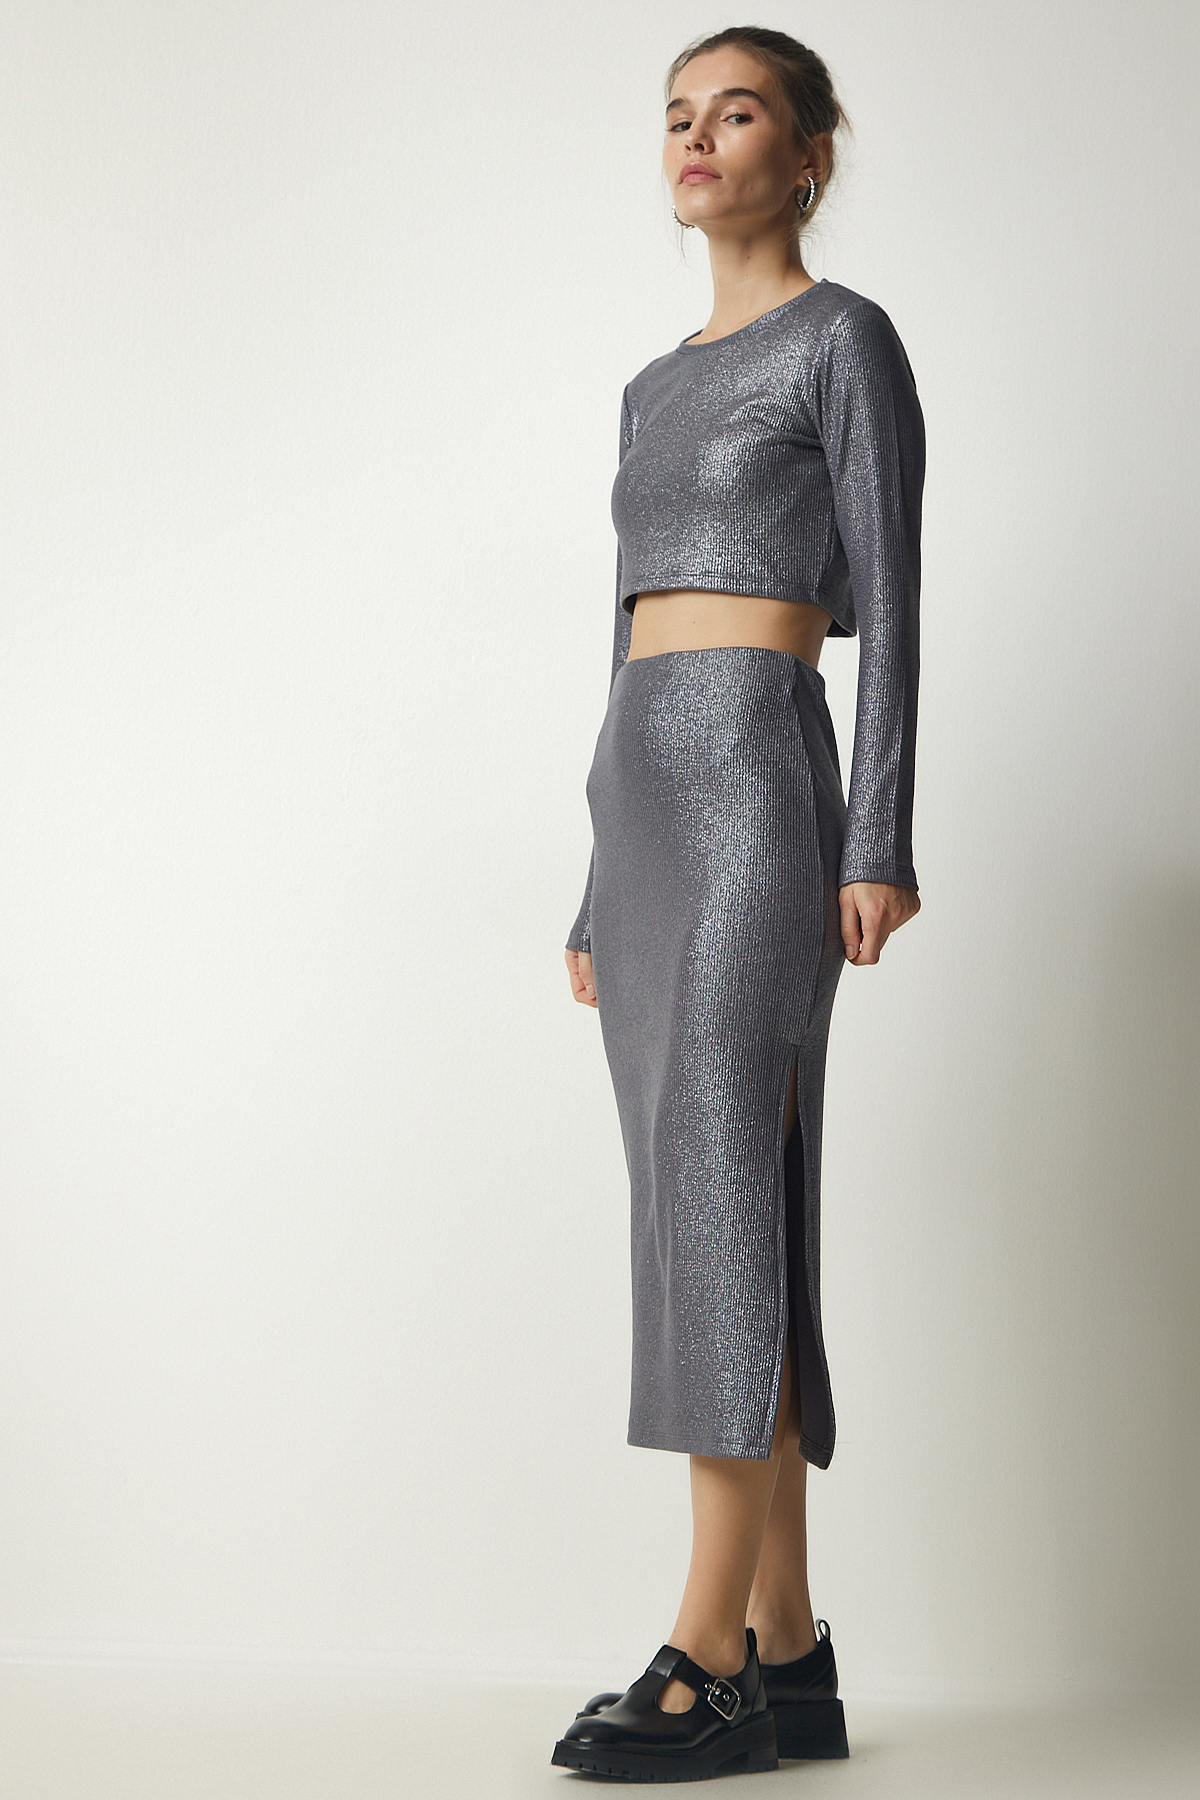 Happiness İstanbul Women's Gray Sparkly Ribbed Crop Skirt Suit